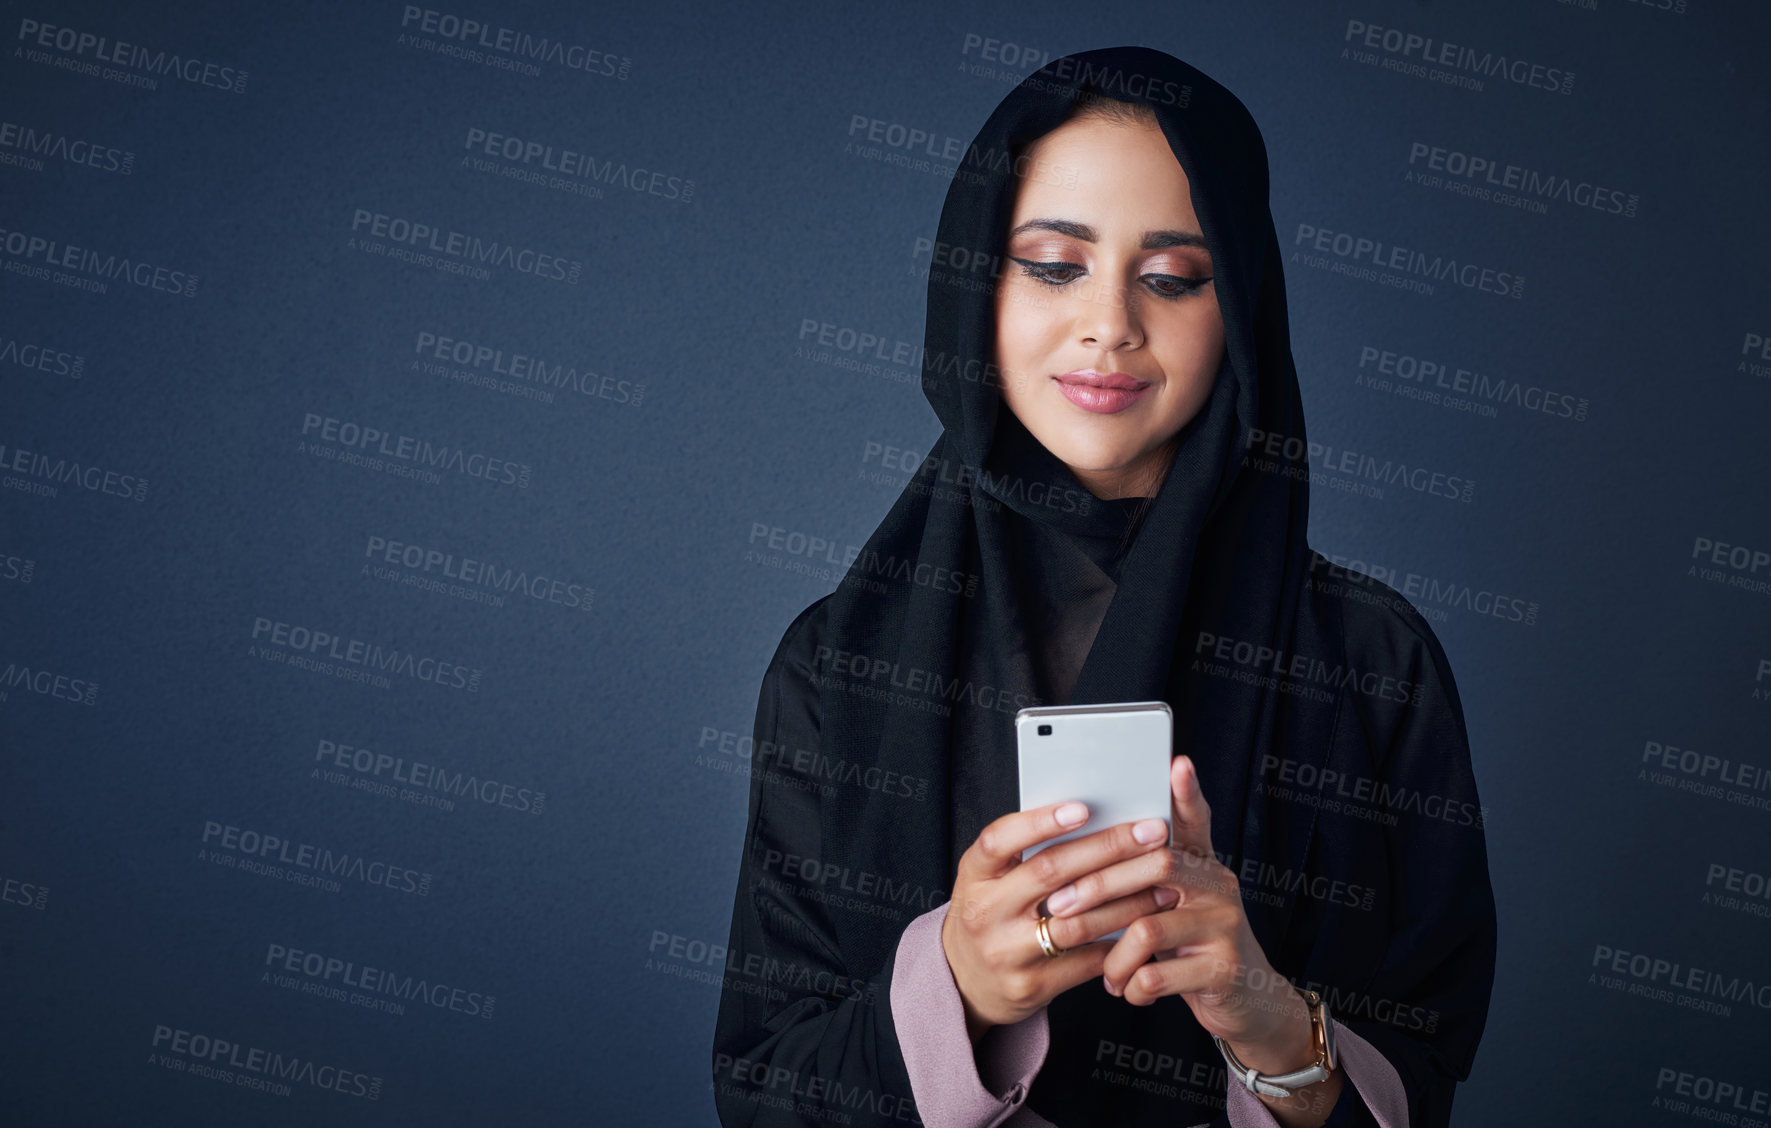 Buy stock photo Studio shot of a young woman wearing a burqa and using a mobile phone against a gray background